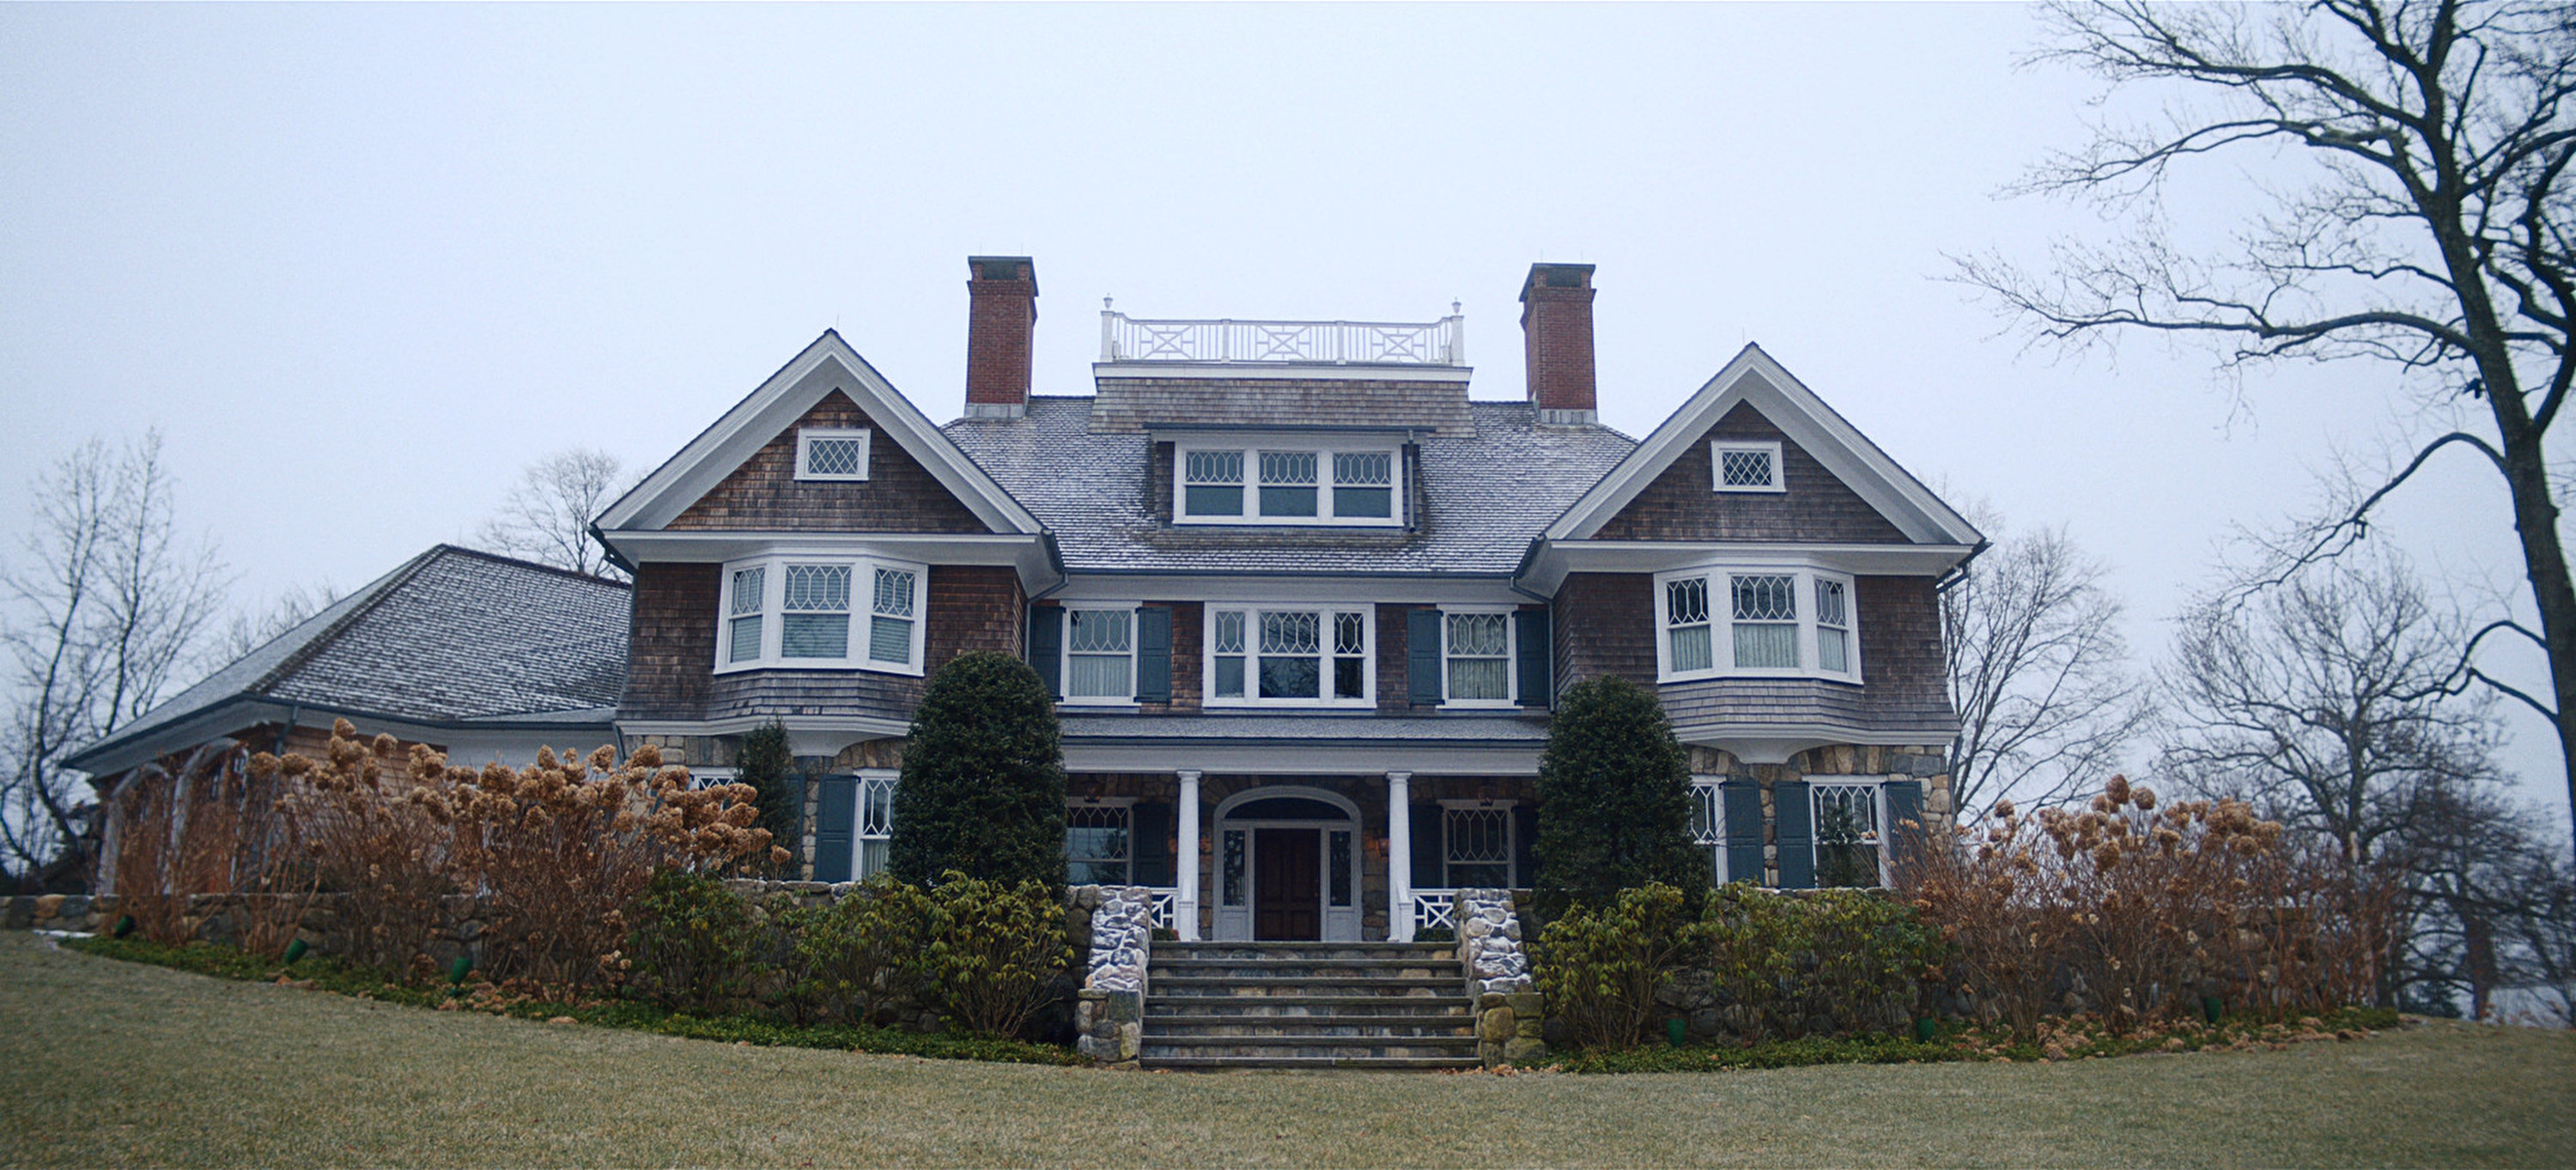 The three-story house featured in the film